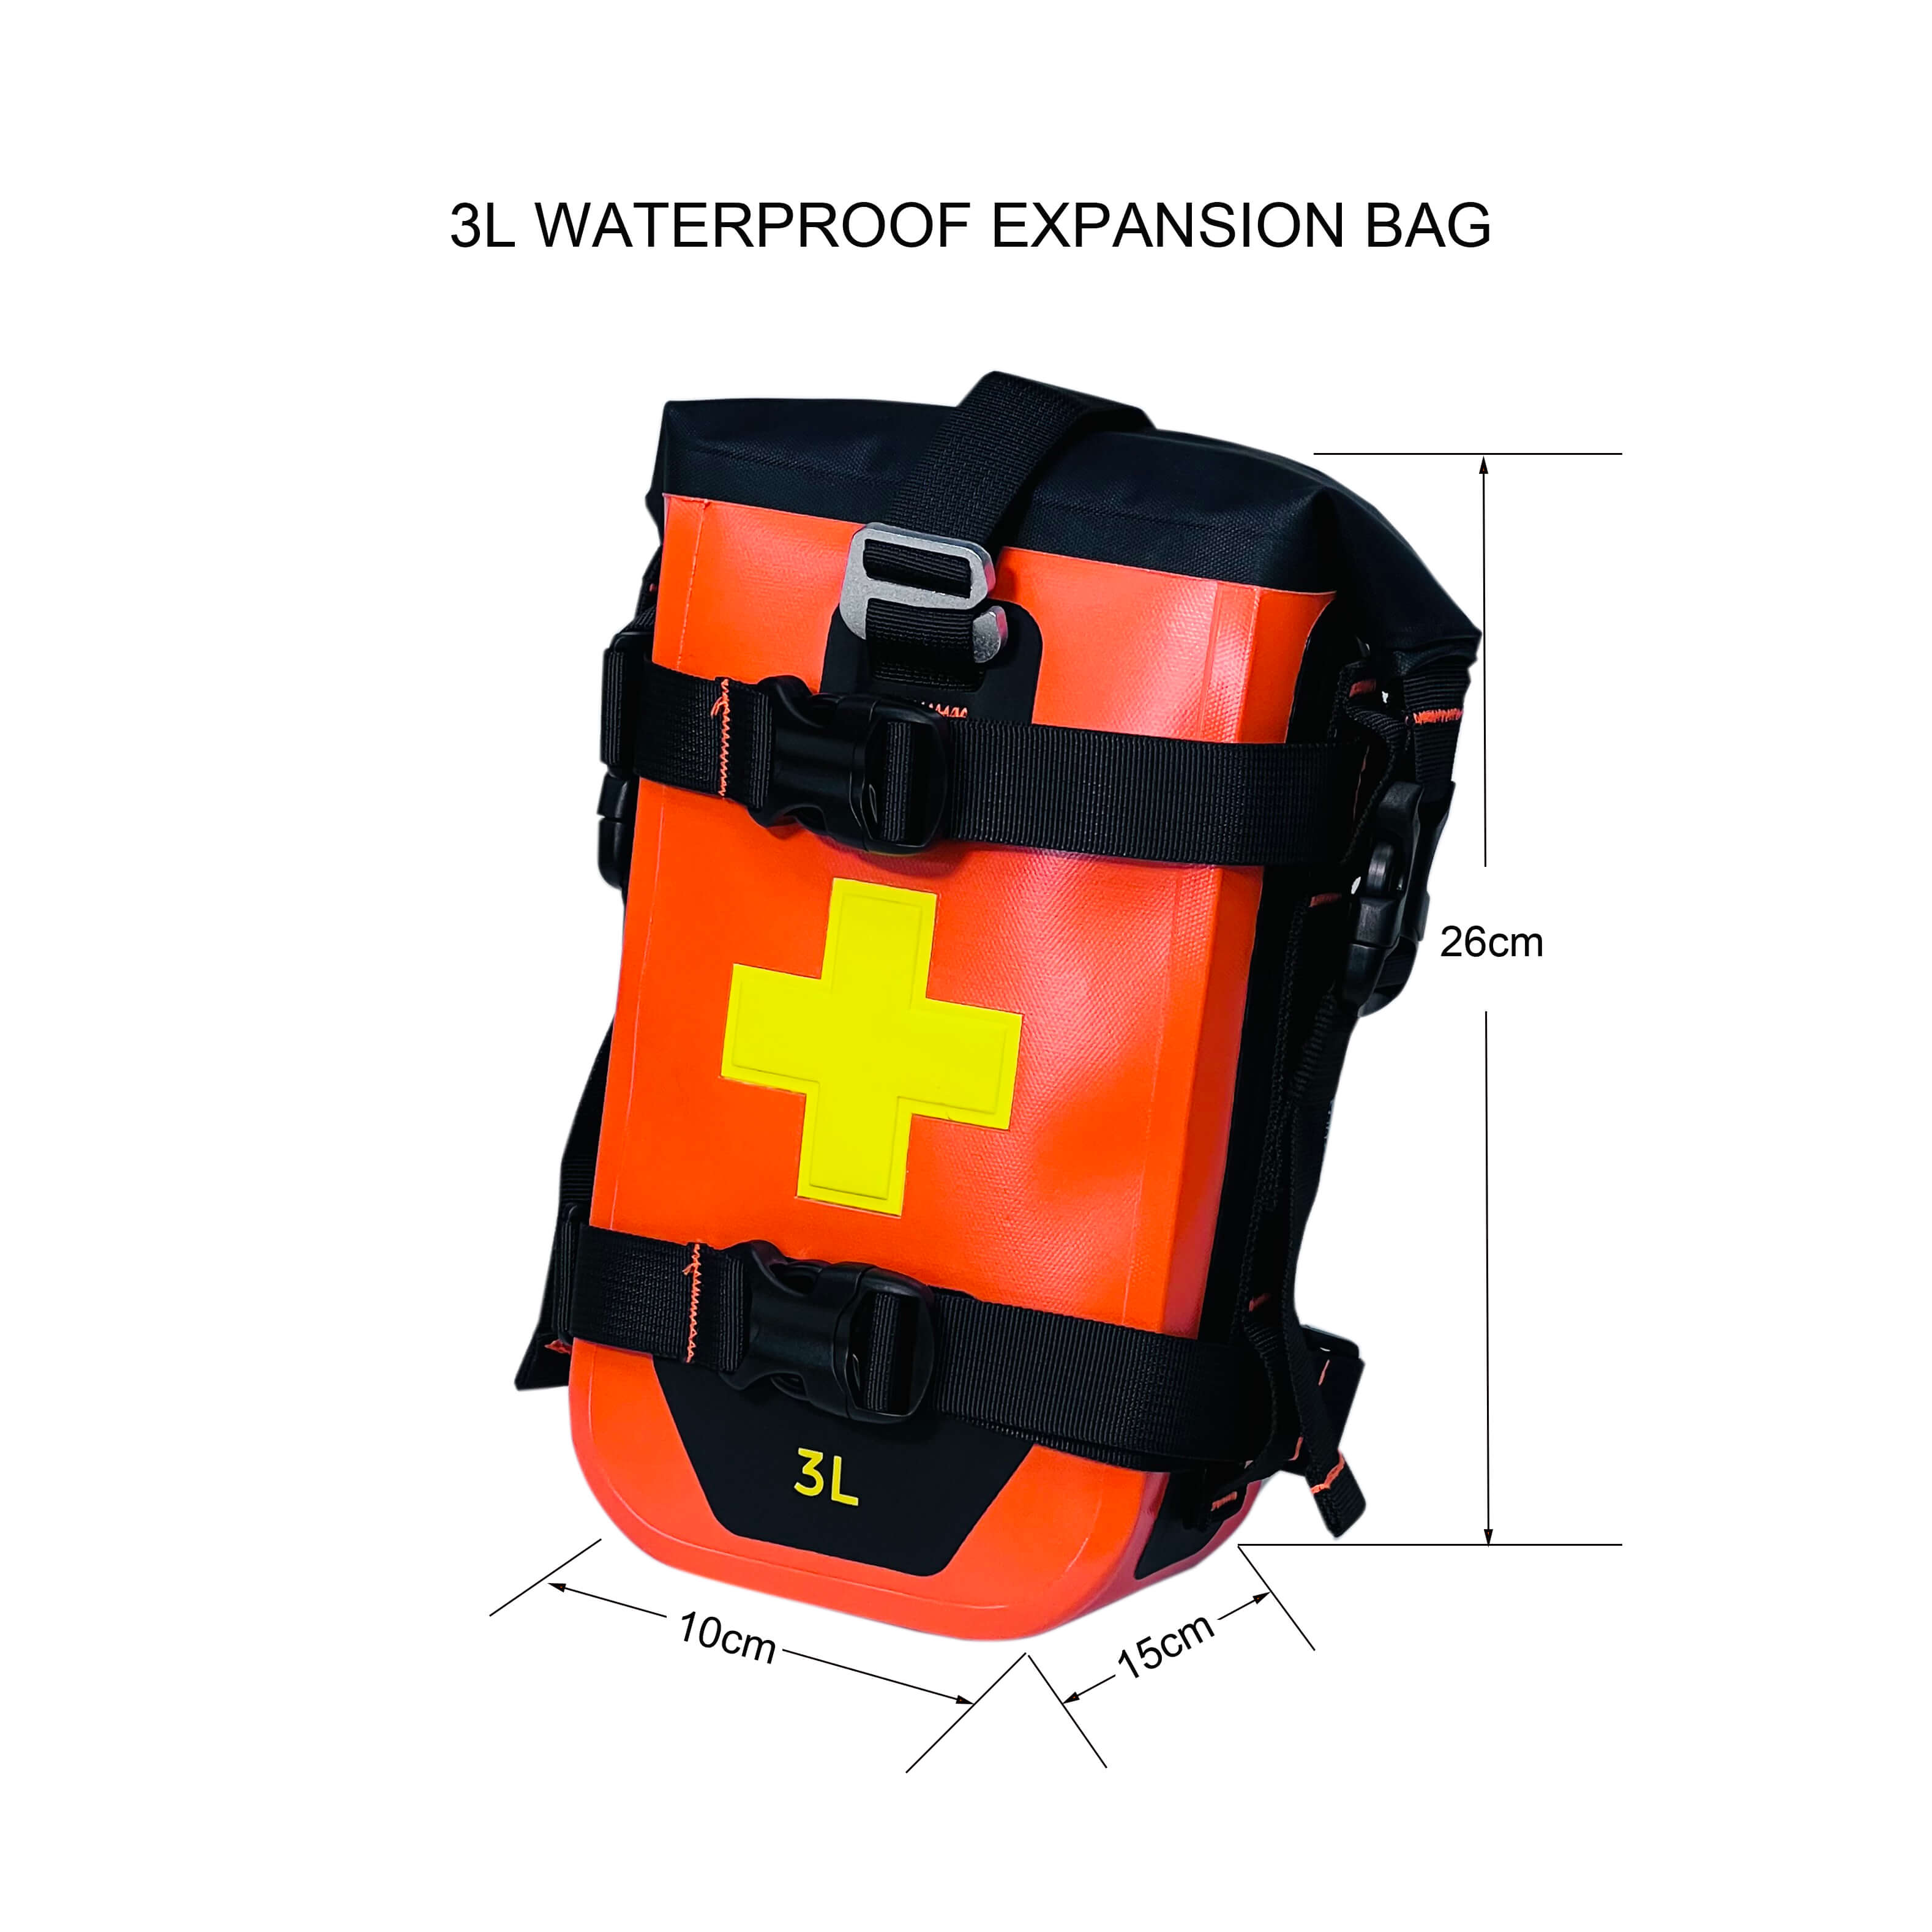 3L Extreme Waterproof Saddle Bags